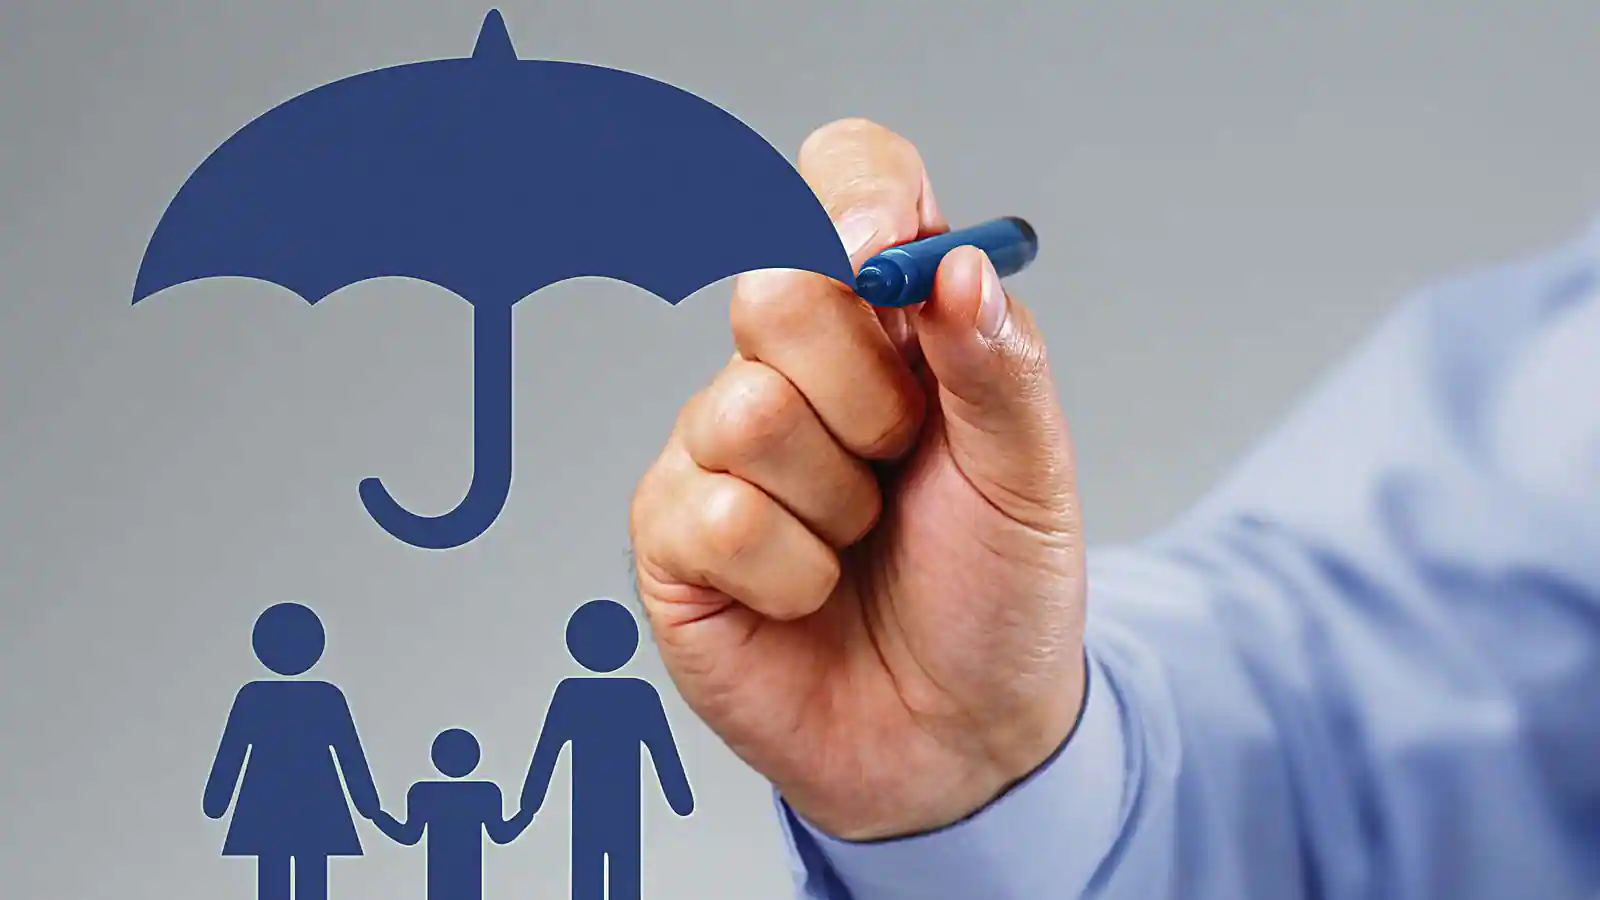 Why buy term life insurance in Singapore?